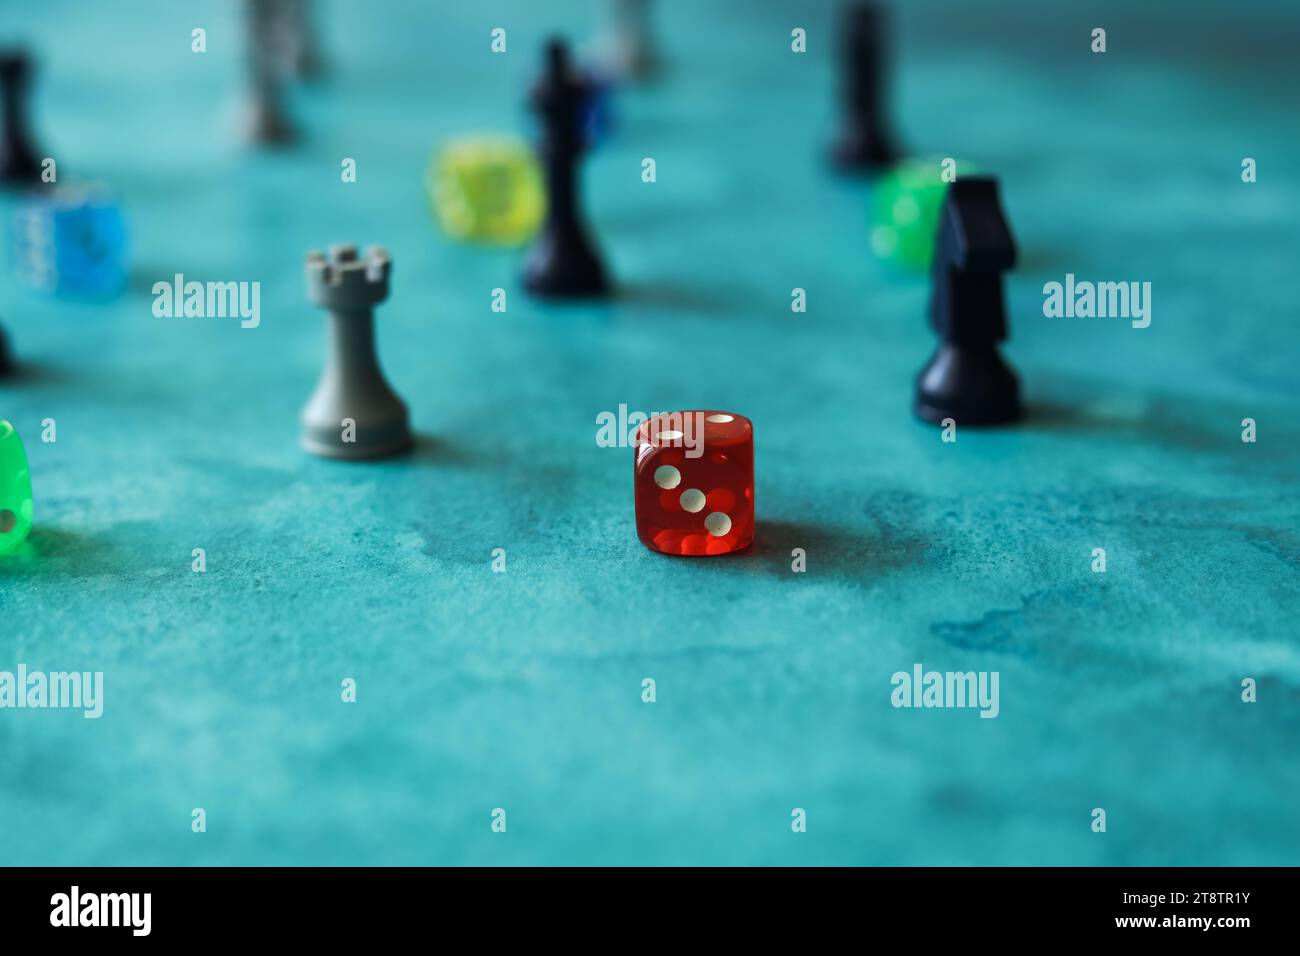 chess pieces and colorful dice on a blue watercolor background pattern Stock Photo